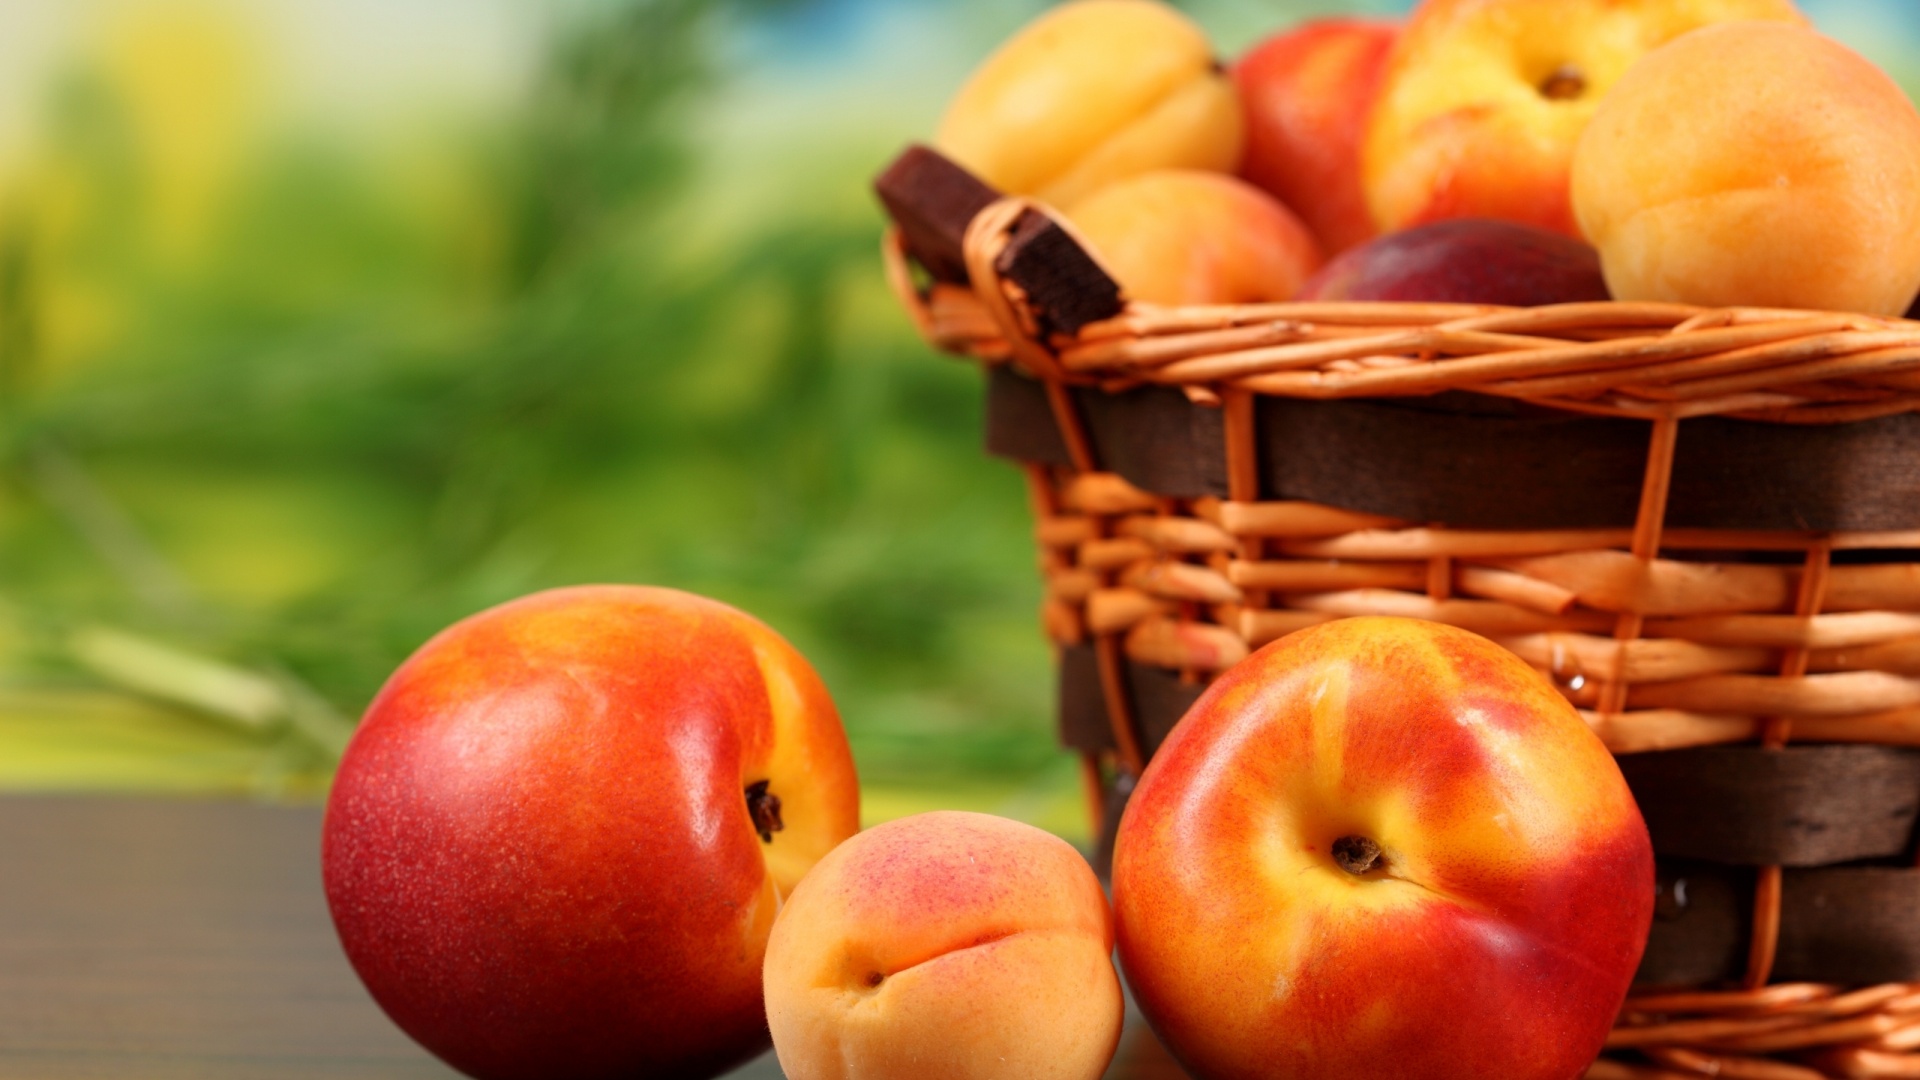 Peaches Nectarines HD Widescreen Wallpapers Archives   HD Wallpapers 1920x1080